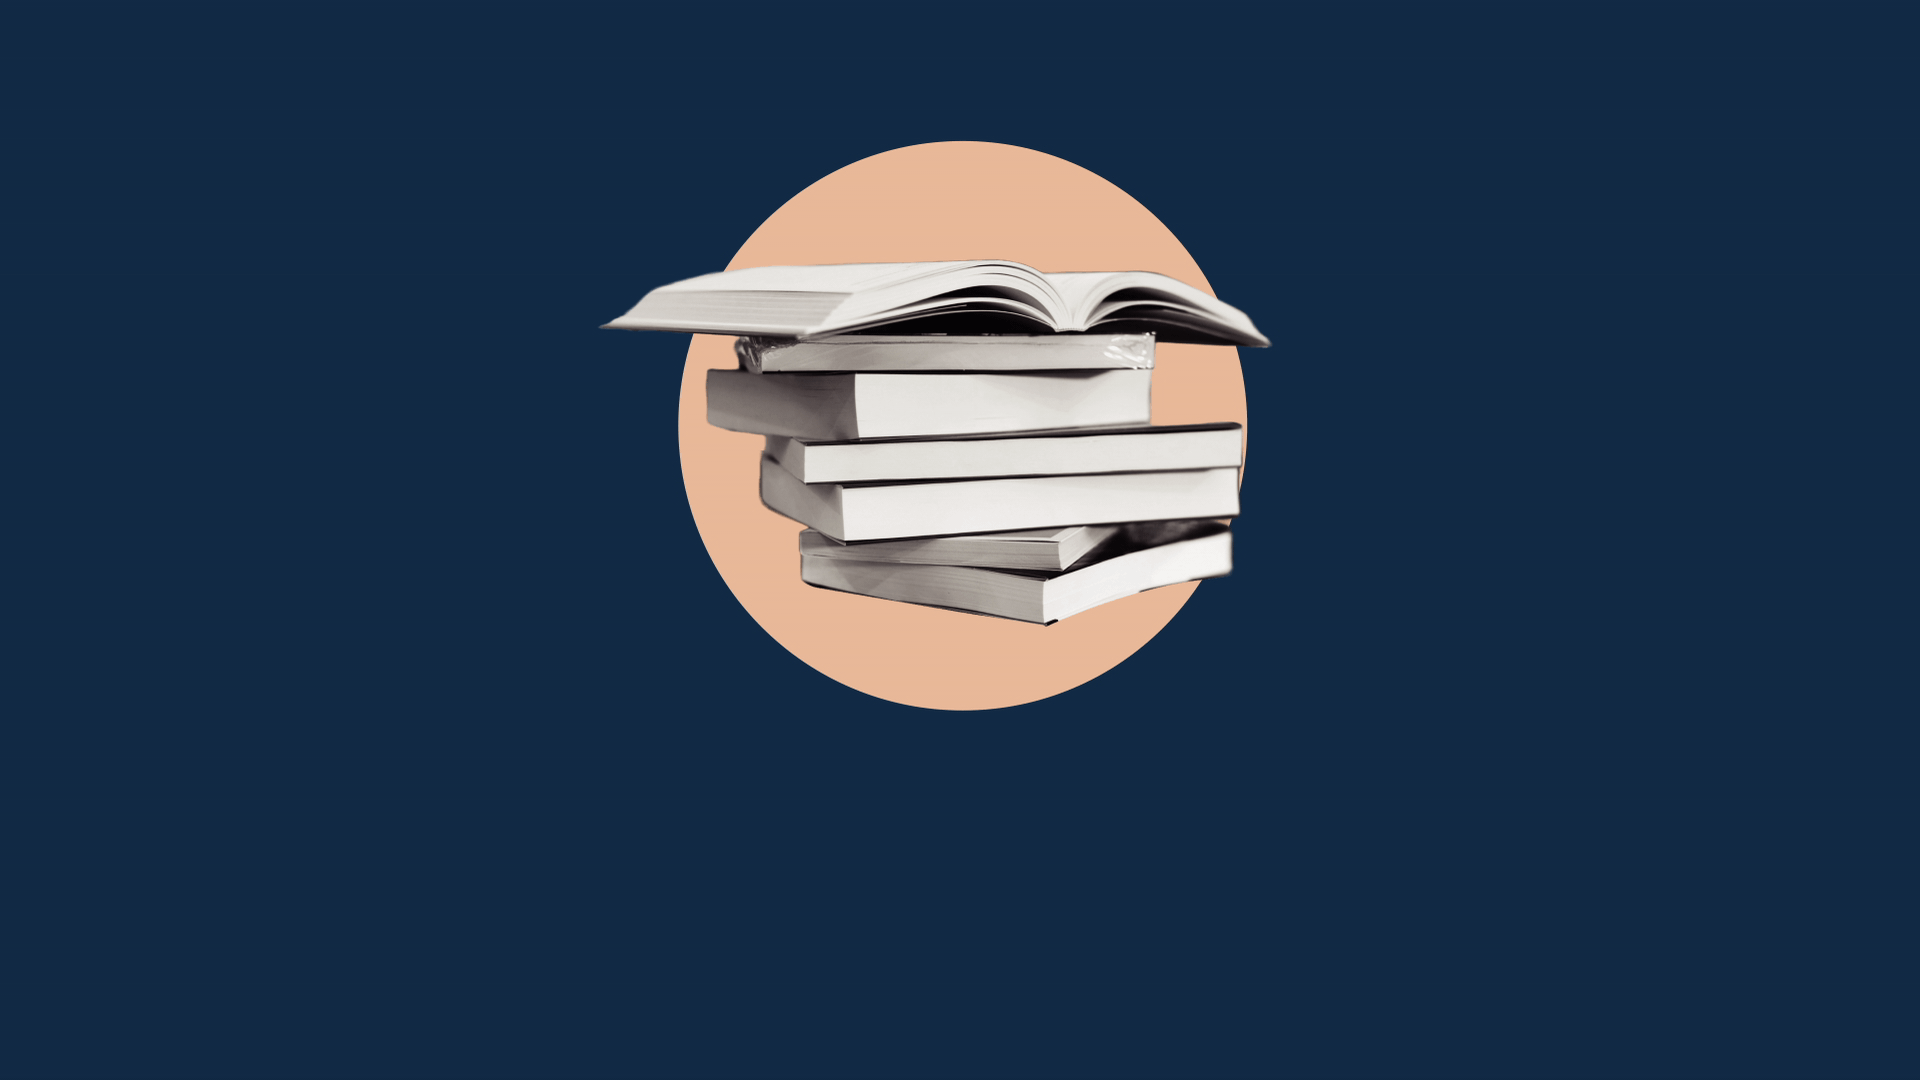 Animated image of hands reaching for a stack of books